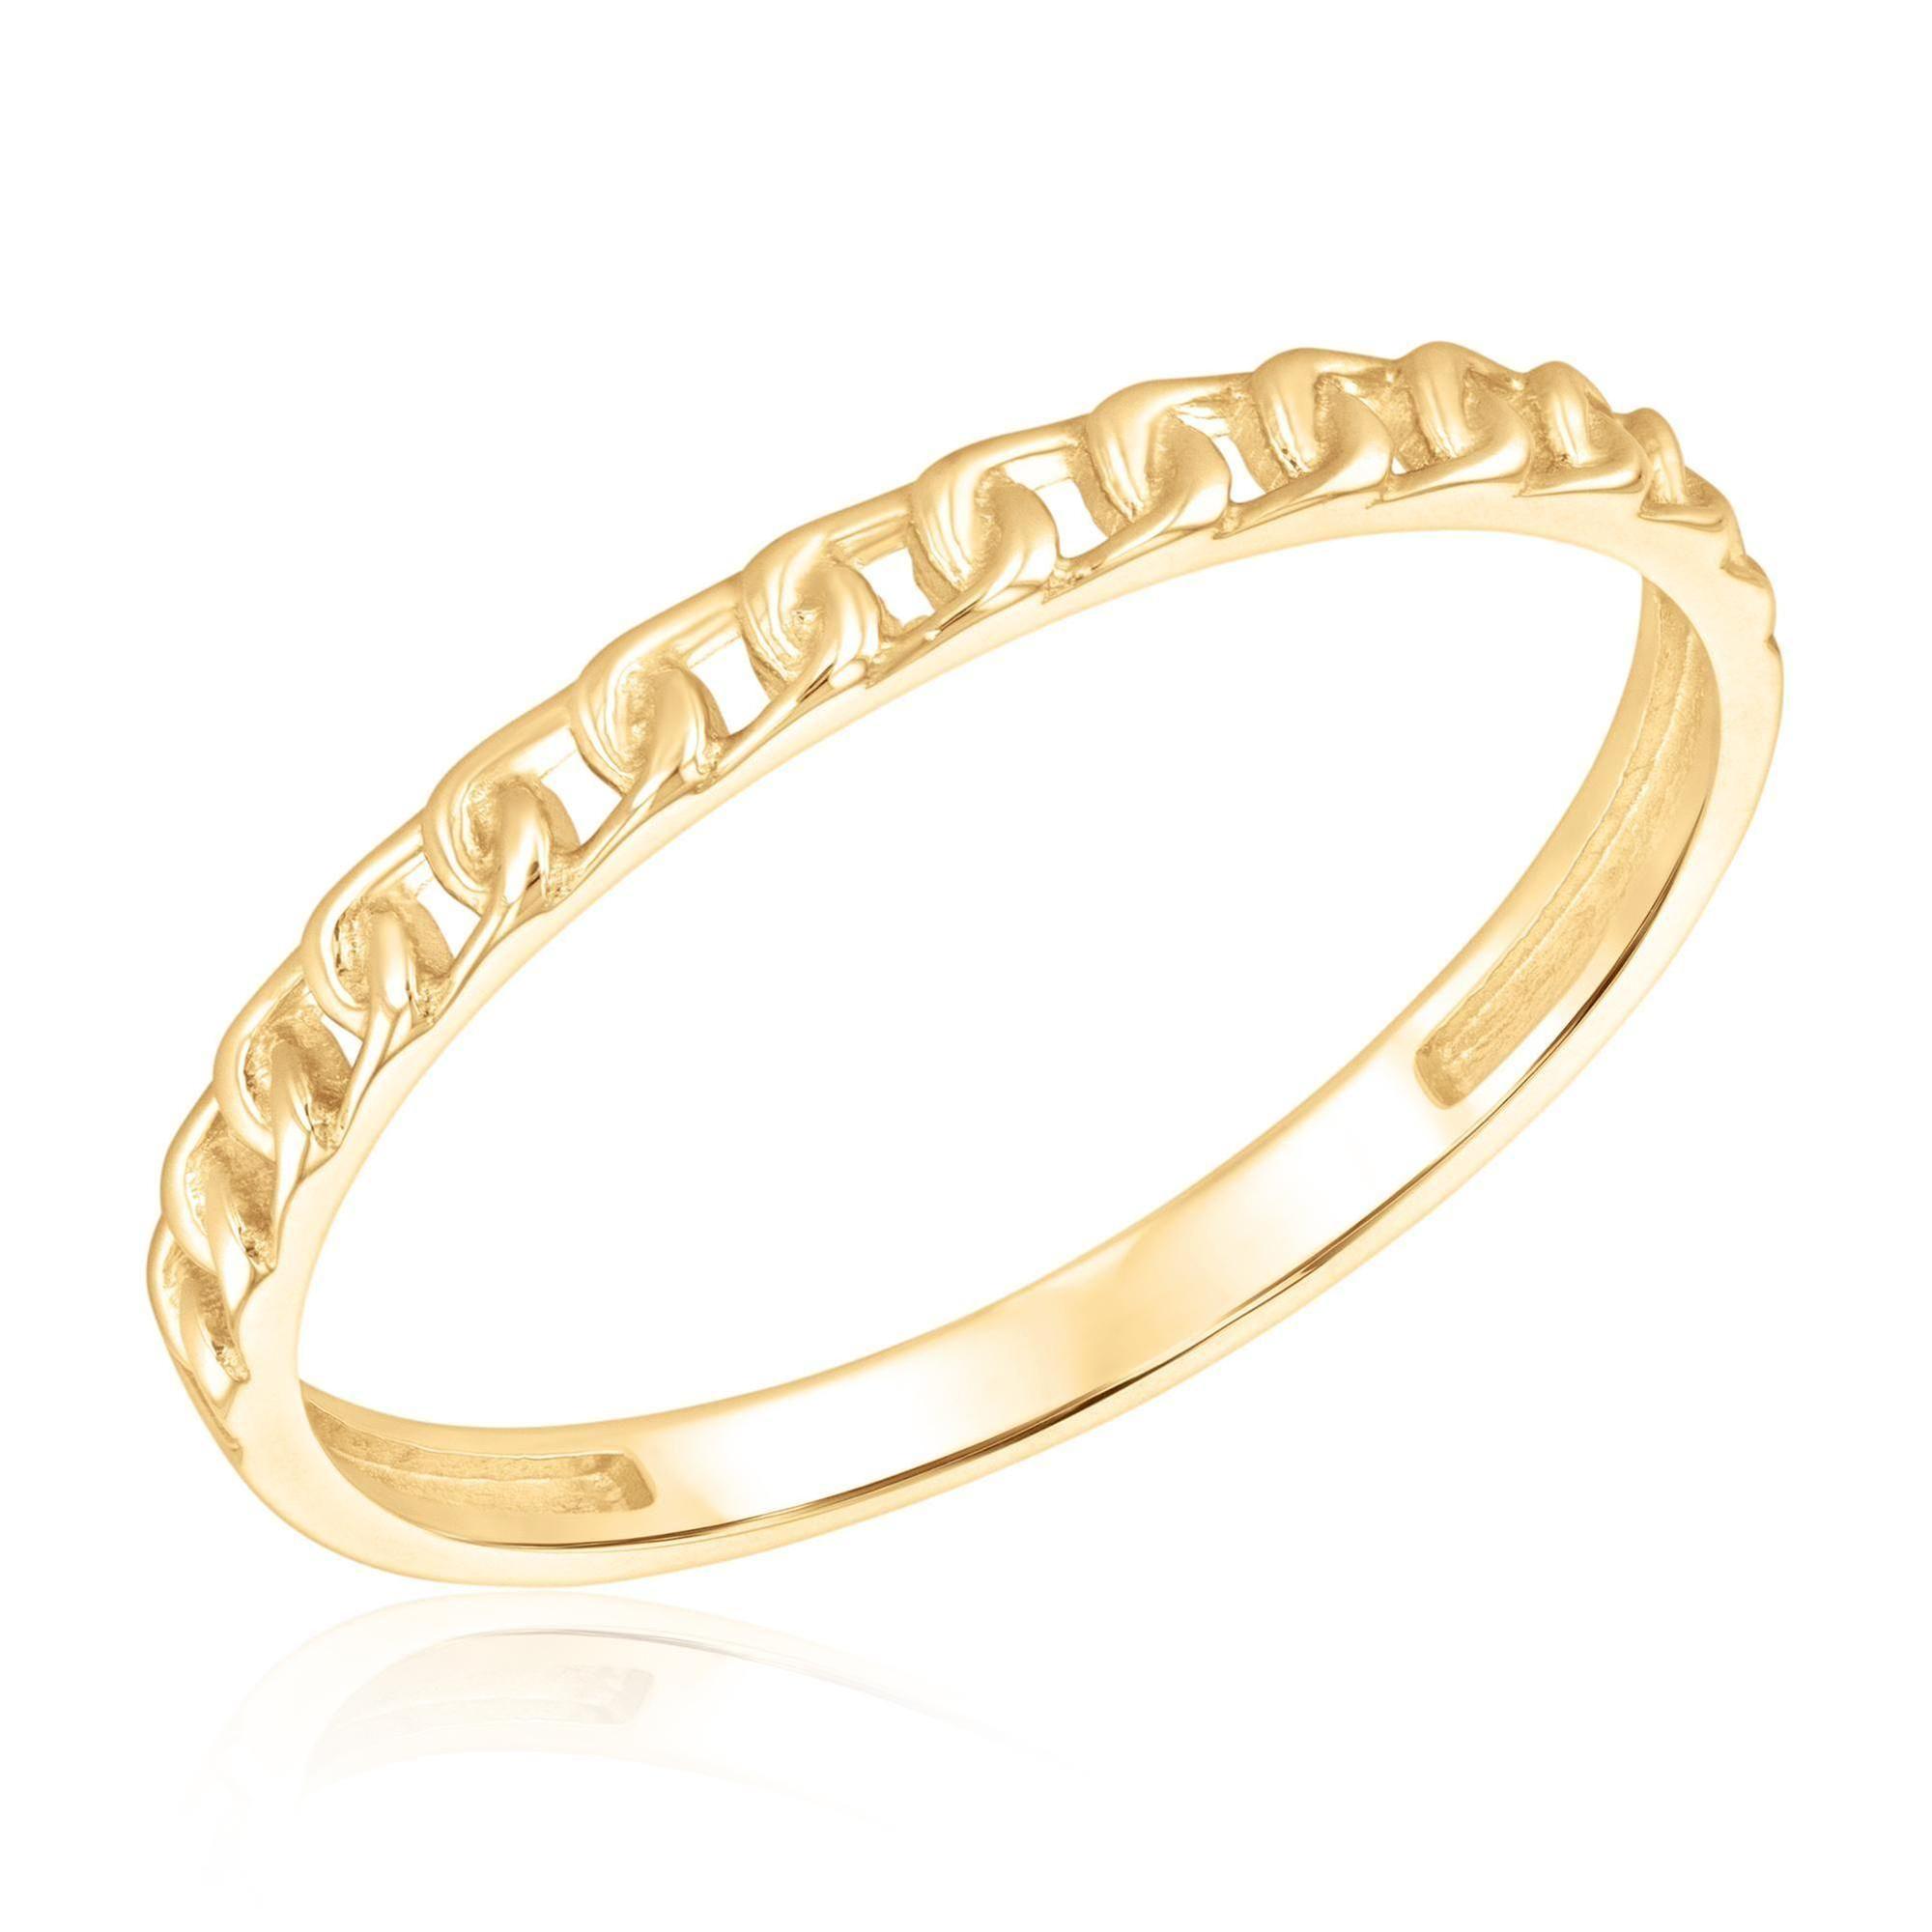 Link Chain Design Yellow Gold Wedding Band - Embrace Collection - Size 4